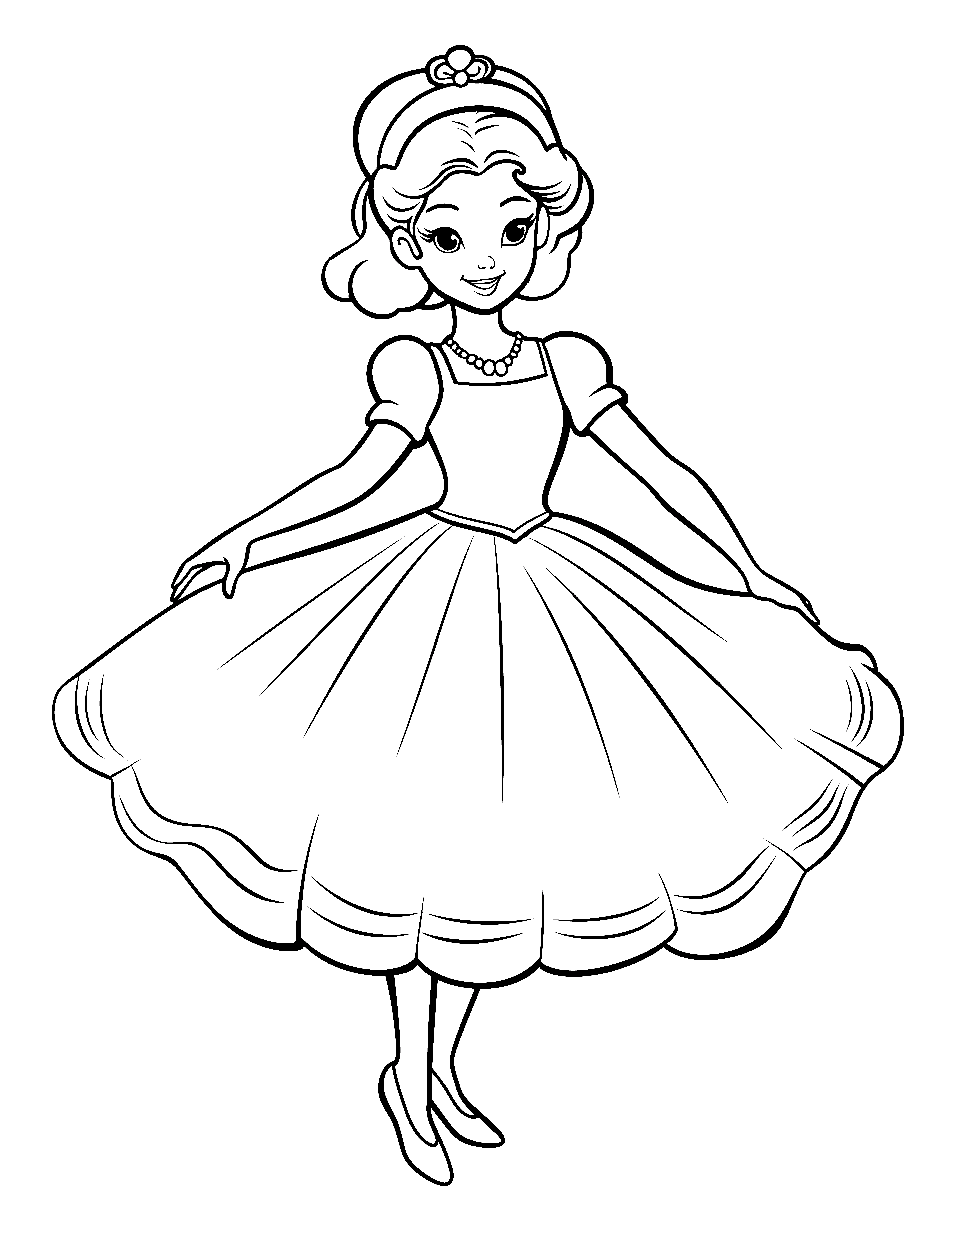 Belle As a Ballerina Coloring Page - The character Belle from Beauty and the Beast, dressed as a ballerina.